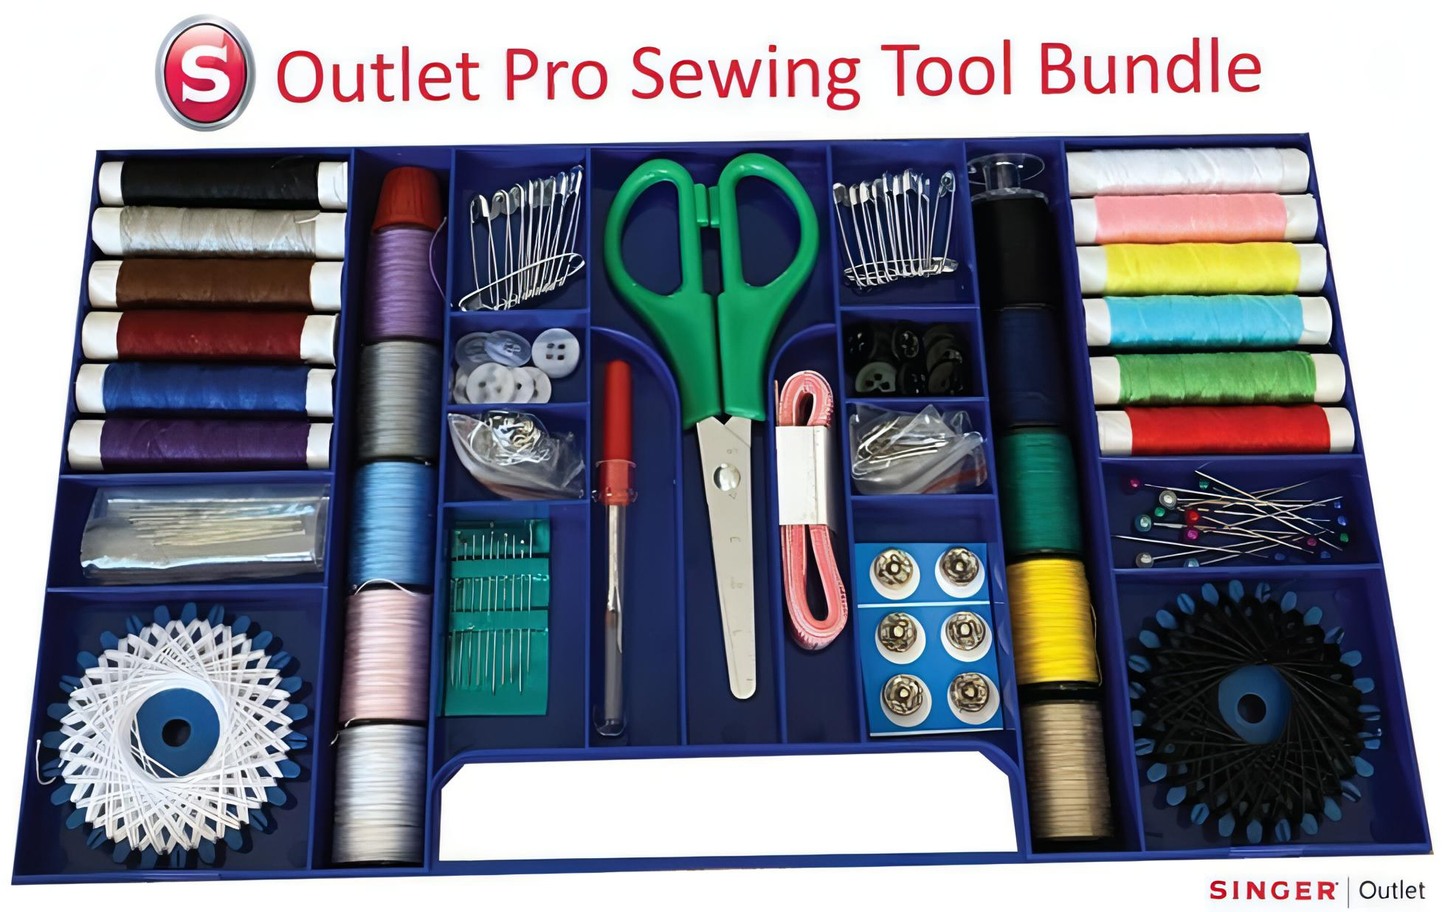 Singer Outlet Professional Sewing Tool Bundle with 145 pieces